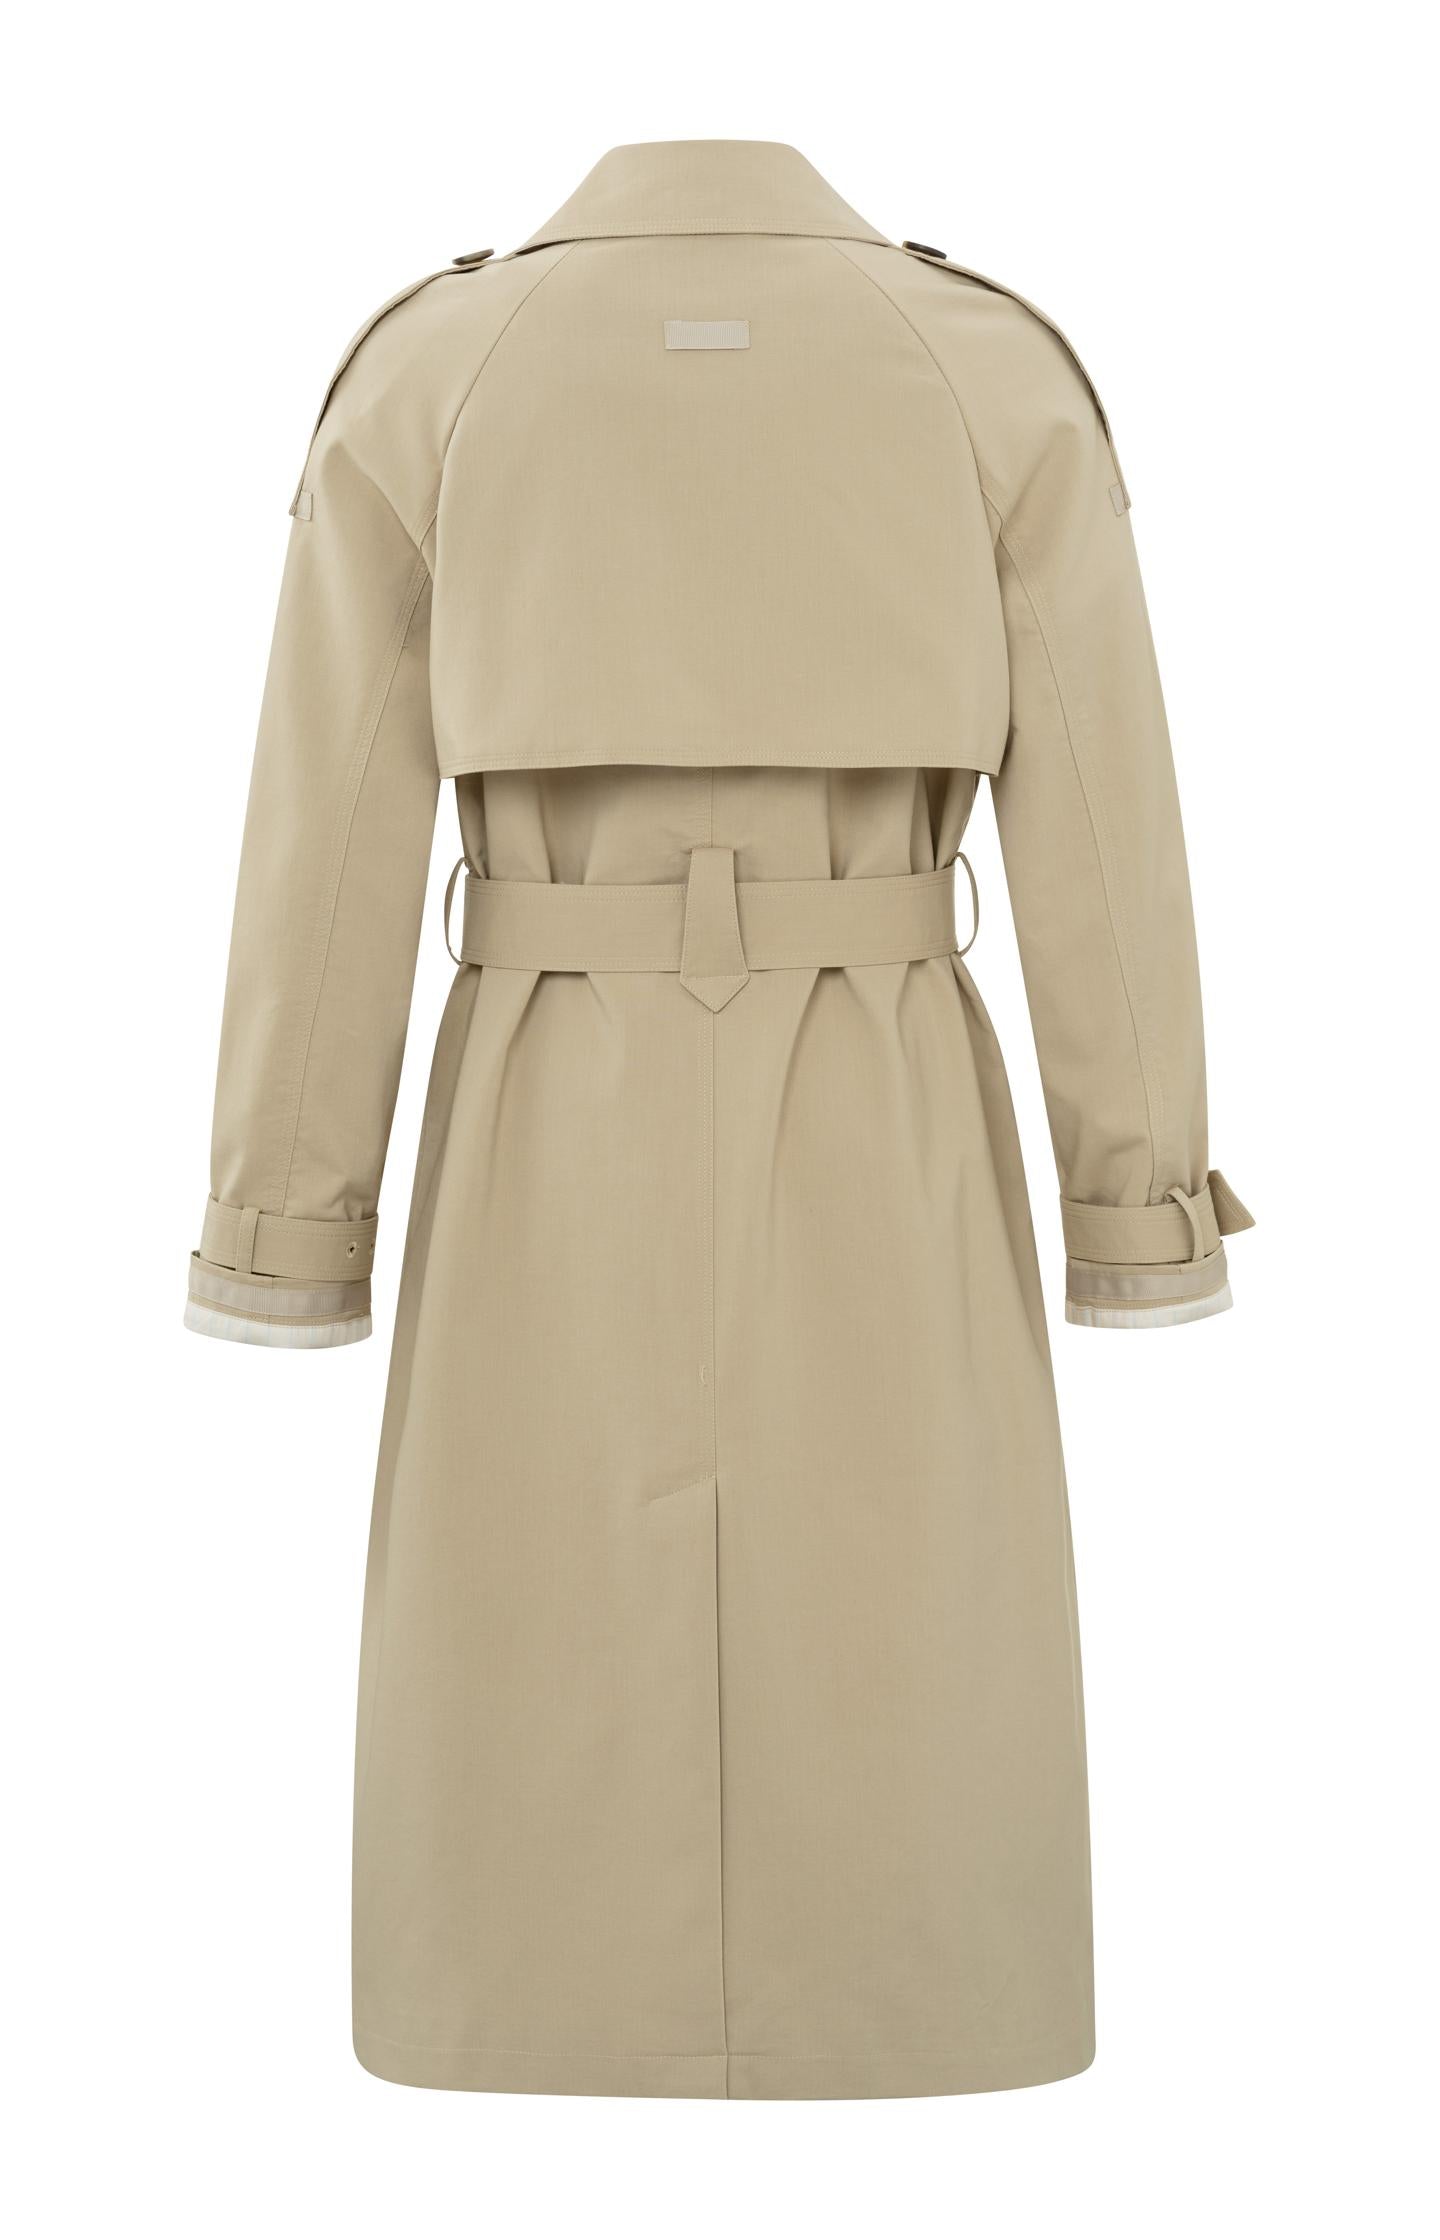 Double breasted trench coat with long sleeves, pockets and belt